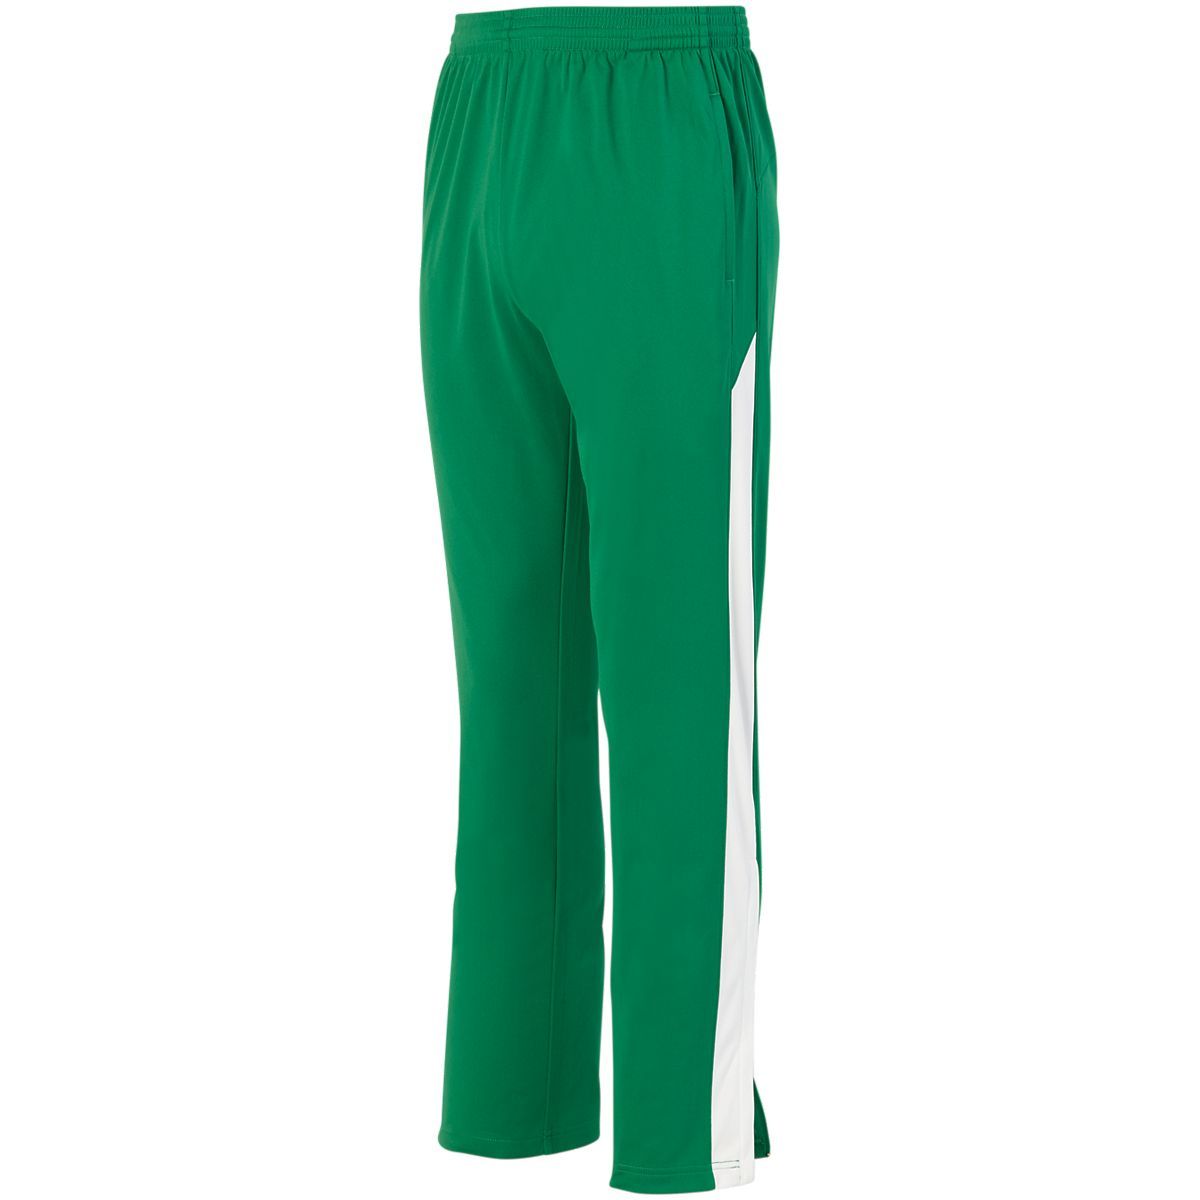 Augusta Sportswear Medalist Pant 2.0 in Kelly/White  -Part of the Adult, Adult-Pants, Pants, Augusta-Products product lines at KanaleyCreations.com